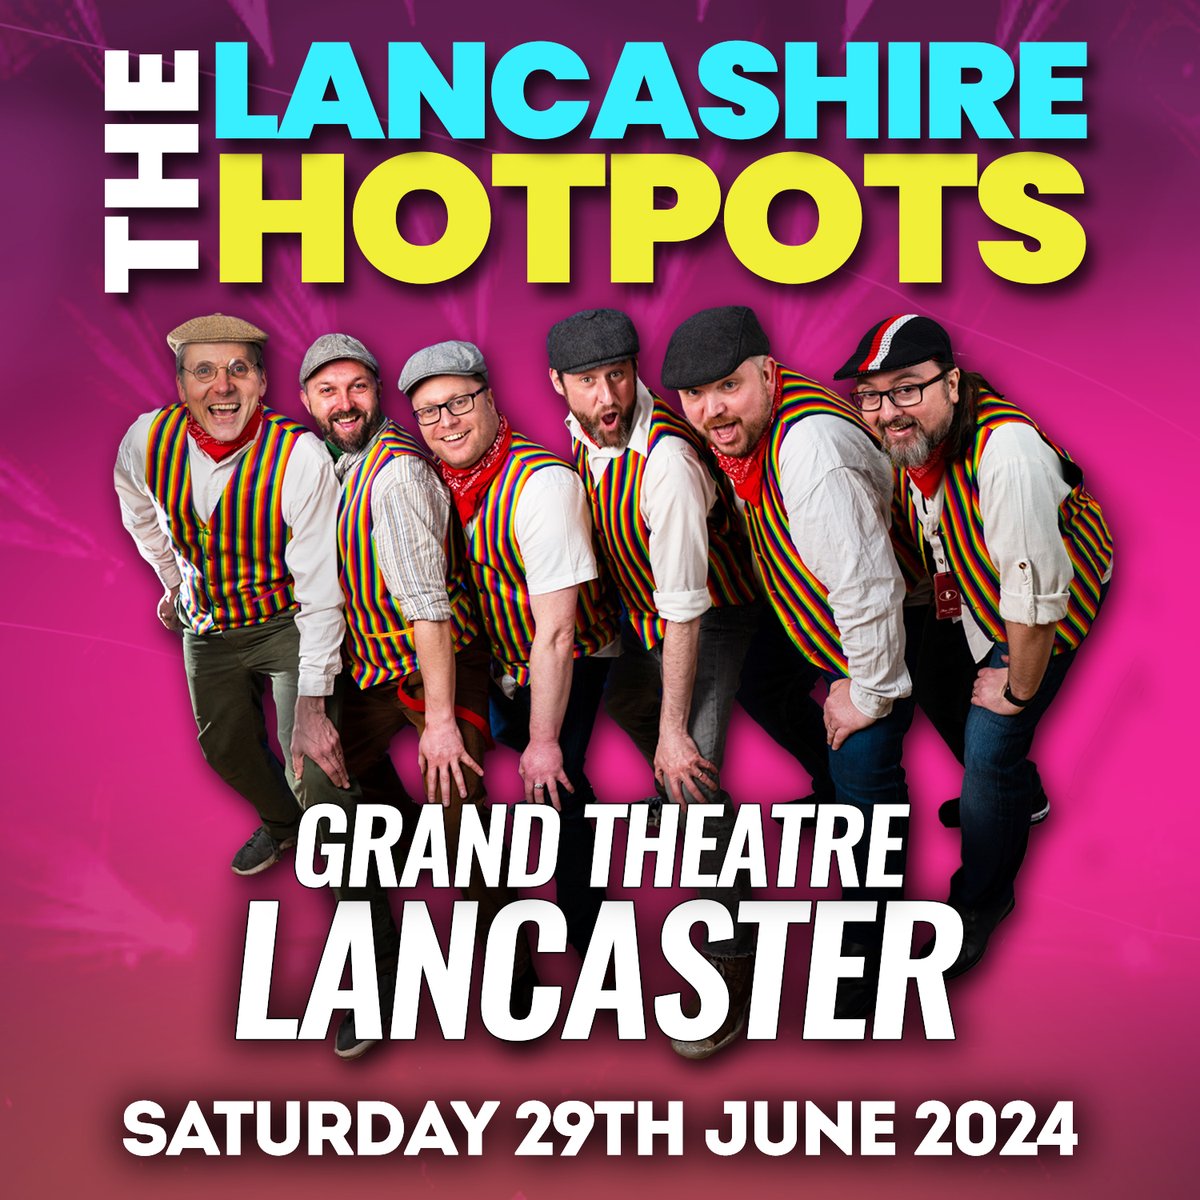 ON SALE NOW!!! Get ready for a Saturday night like no other! Join The Lancashire Hotpots on their Non-Stop Saturday Night Tour for a hilarious evening of silly songs and Hotpot classics. Saturday 29th of June 2024, 7:30pm tinyurl.com/28hkk82t Box Office: 01524 64695